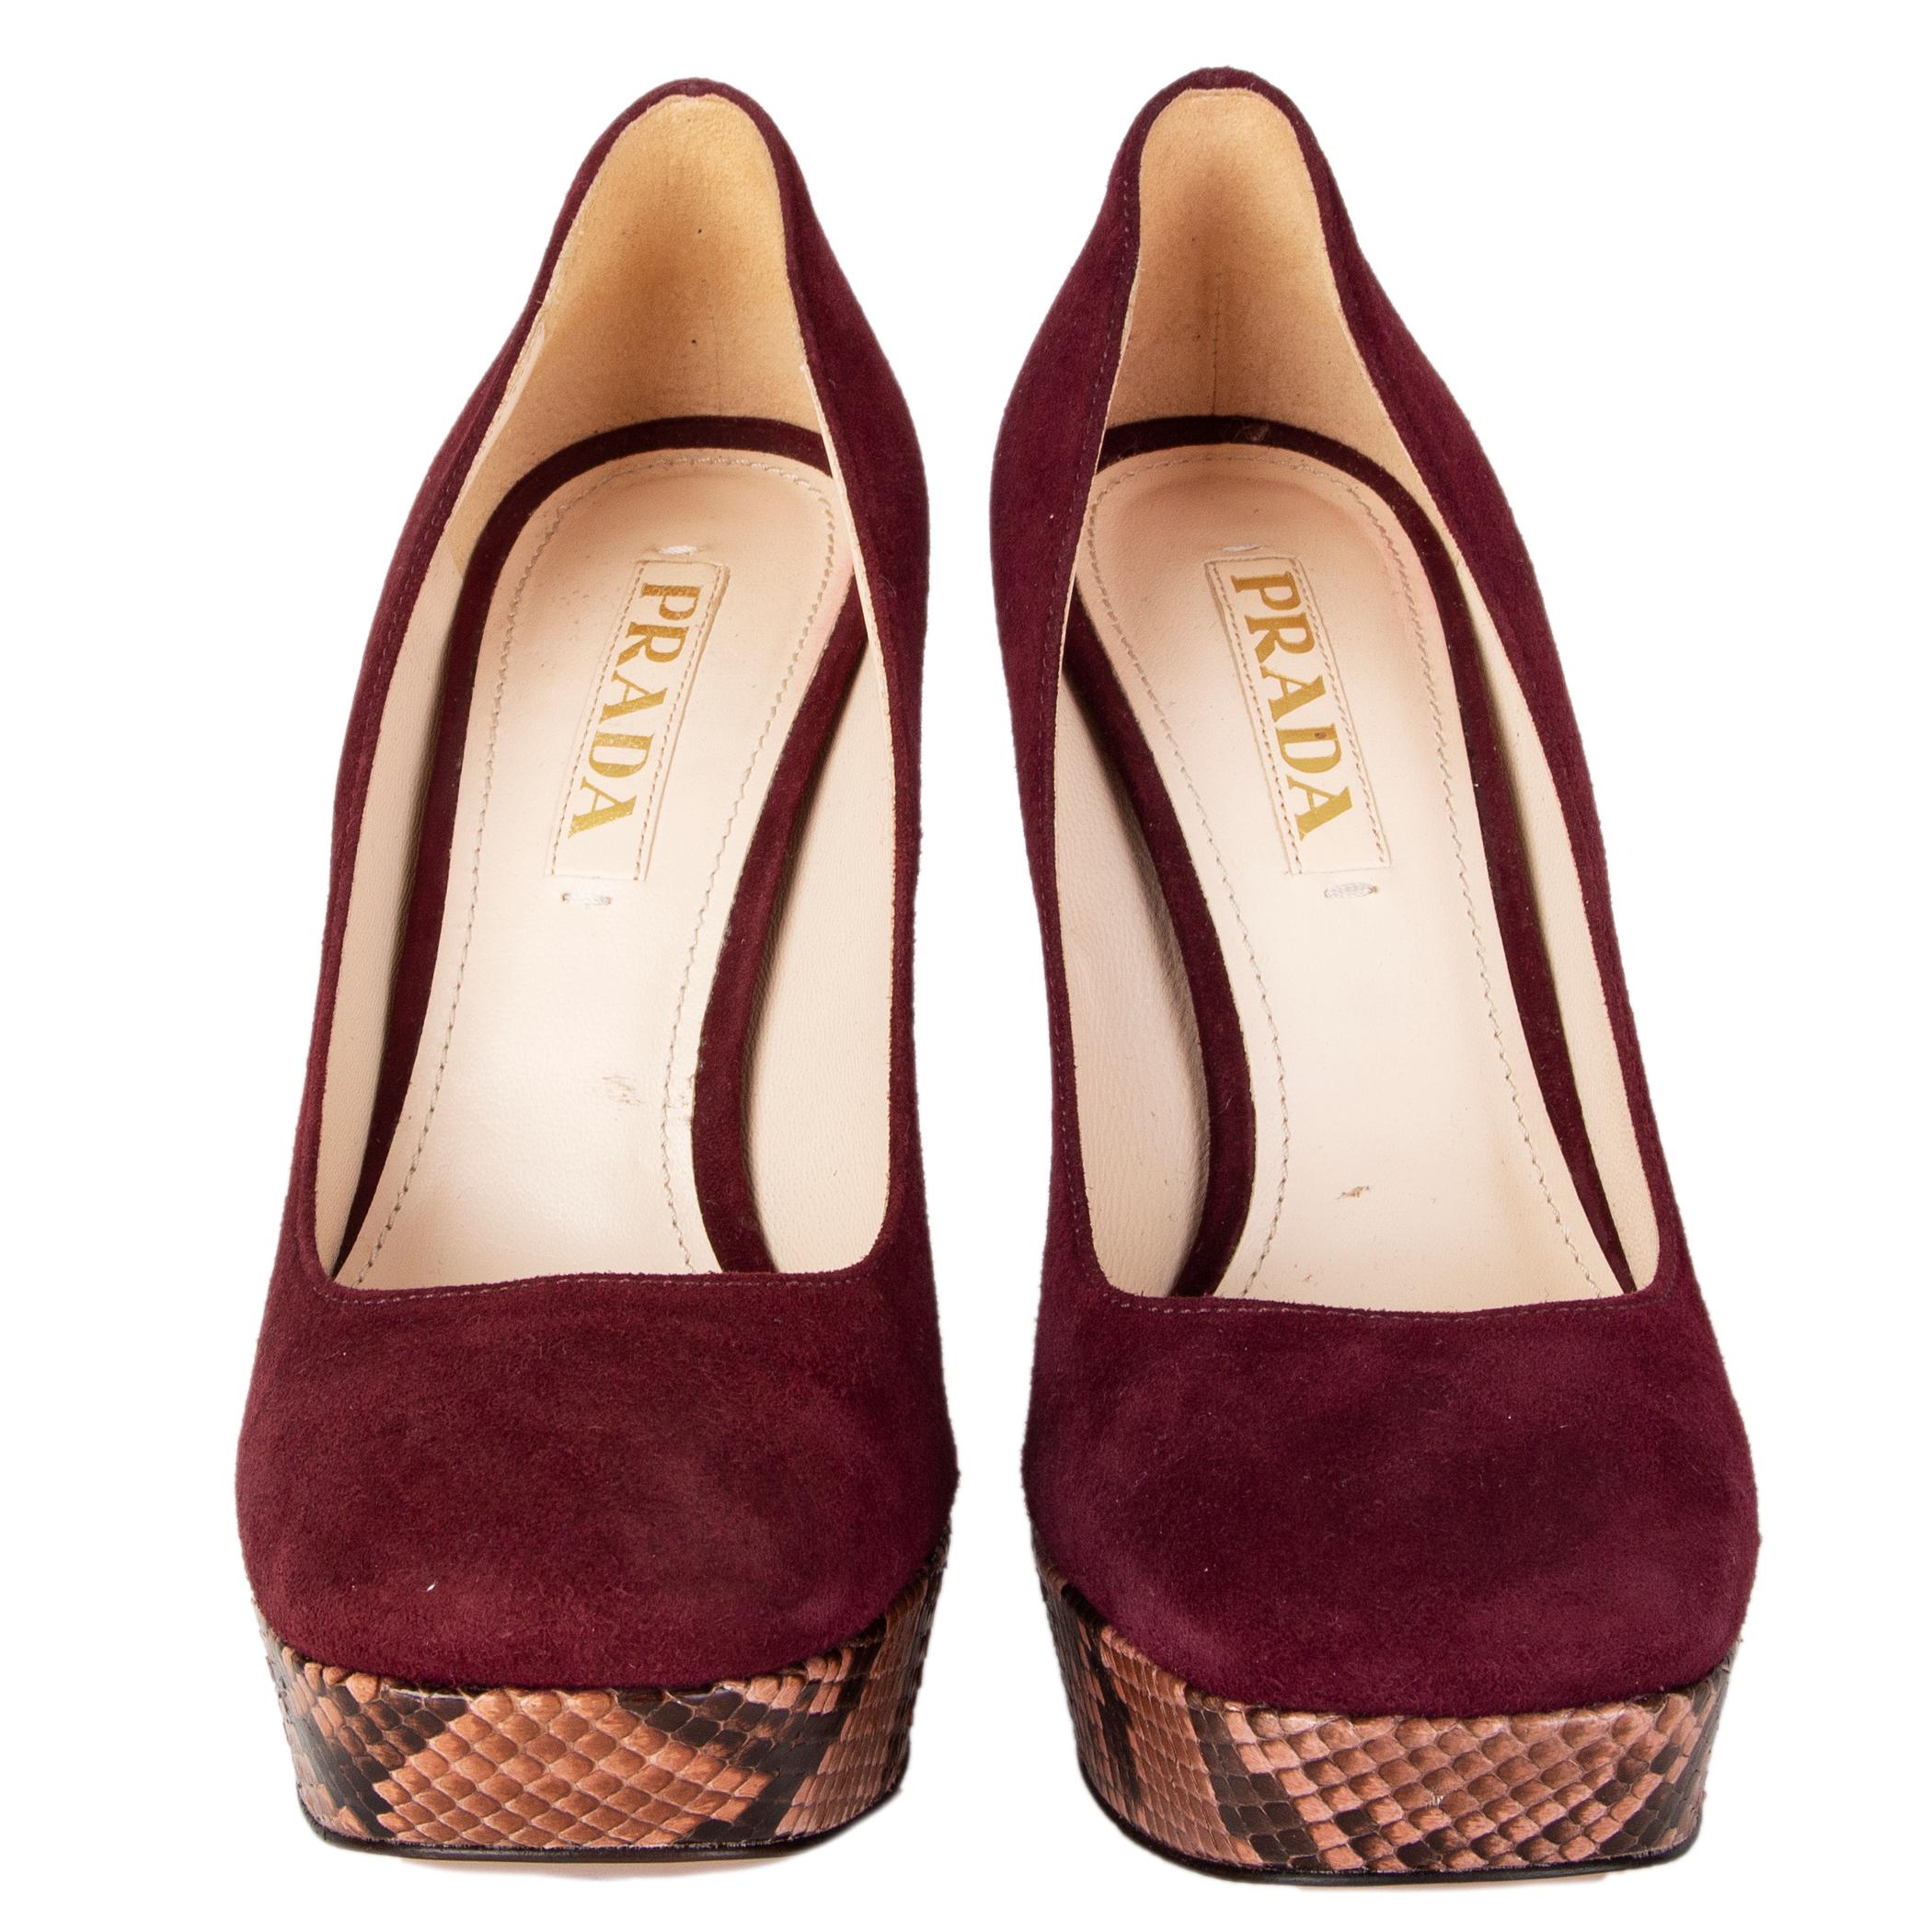 100% authentic Prada platform pumps in burgundy suede featuring rose and brown python heel and platform sole. Have been worn once and are in virtually new condition. 

Measurements
Imprinted Size	36
Shoe Size	36
Inside Sole	23.5cm (9.2in)
Width	7cm